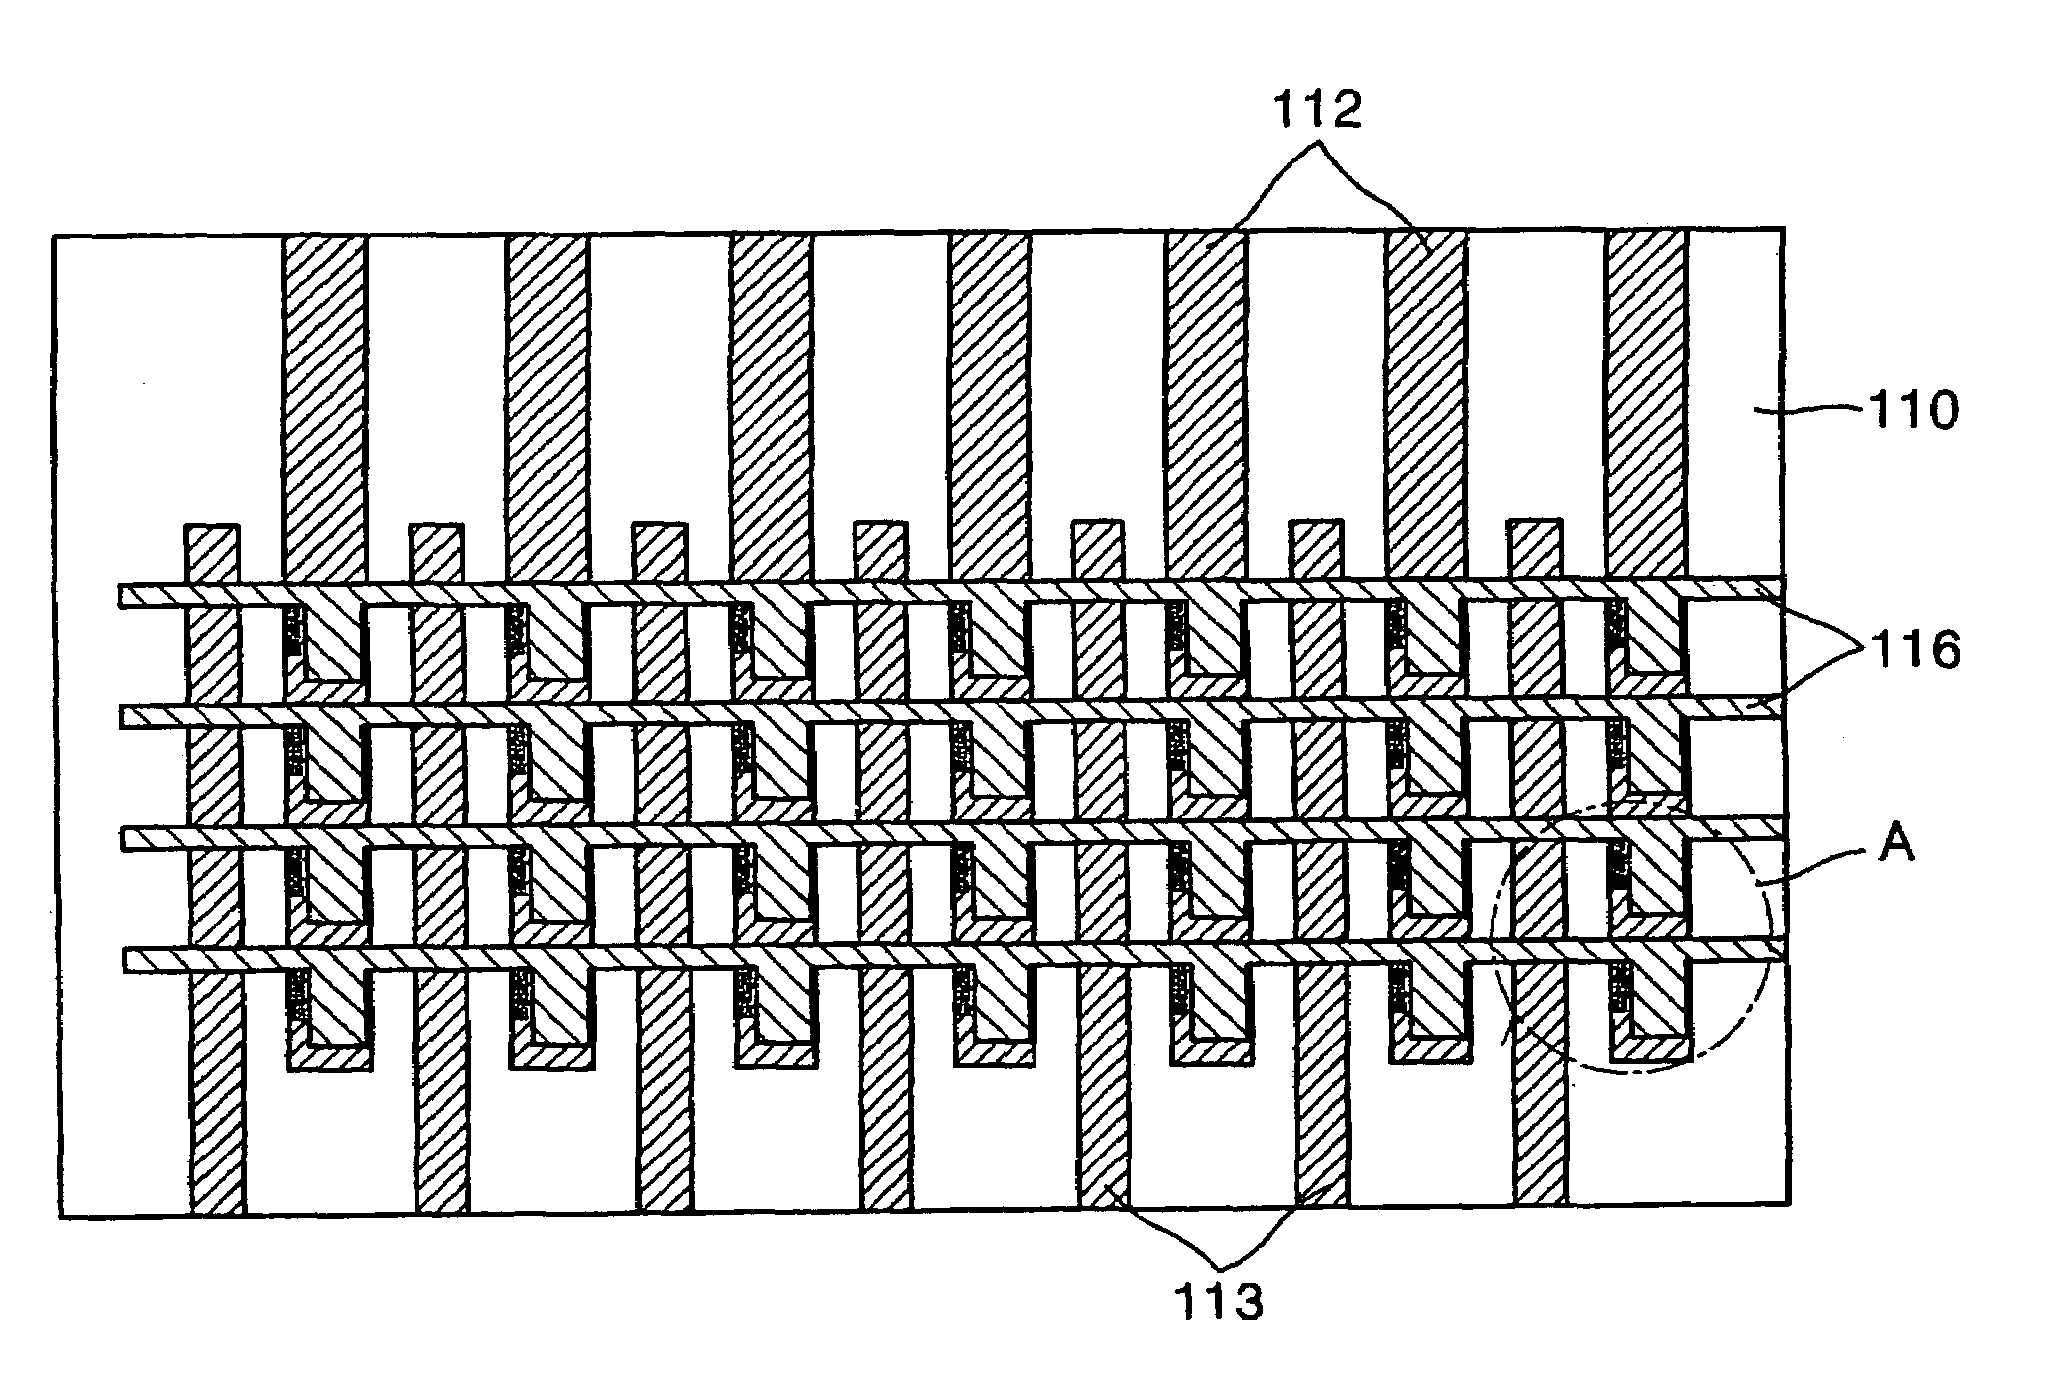 Design for a field emission display with cathode and focus electrodes on a same level